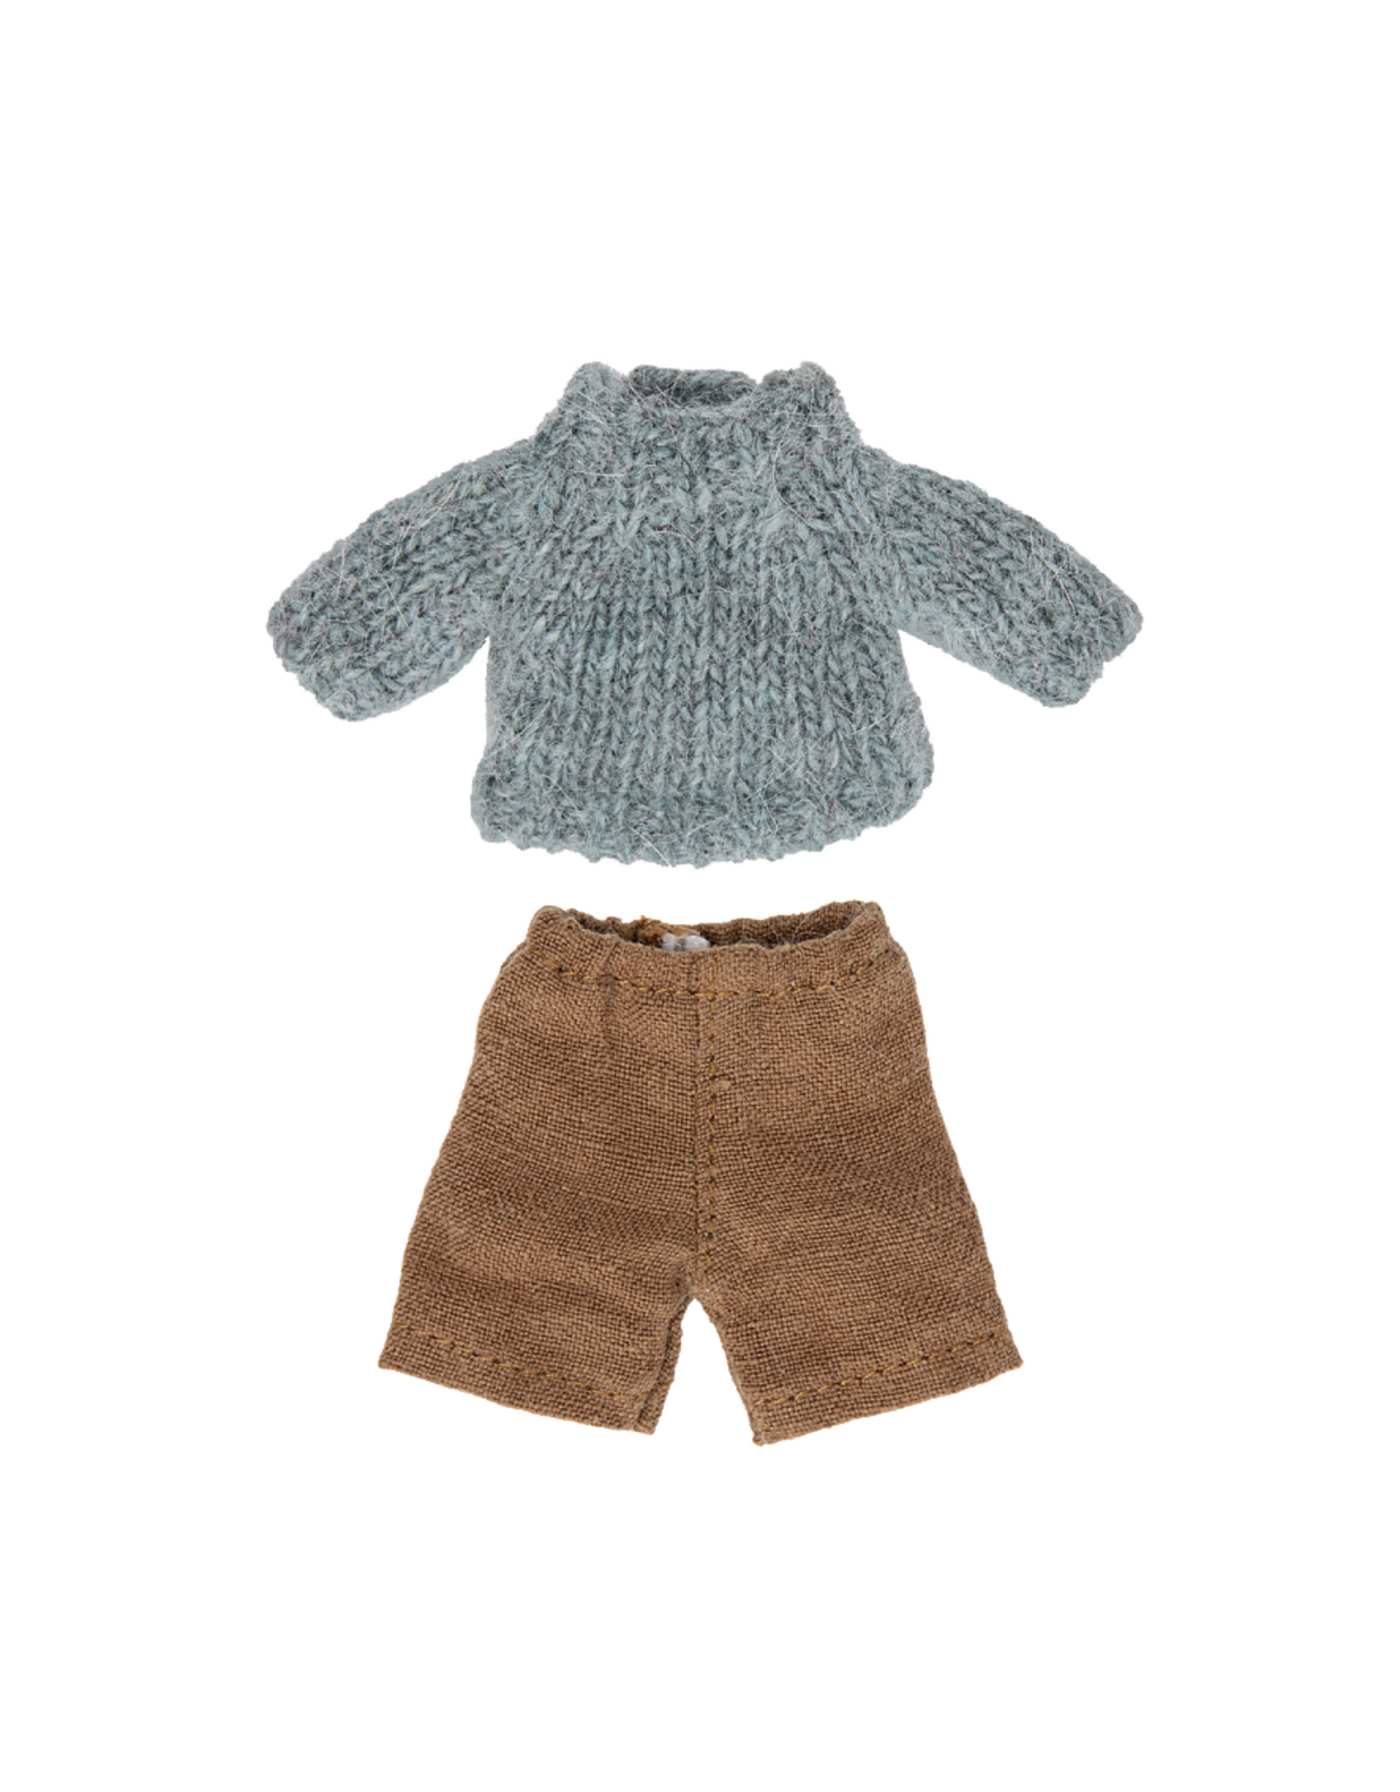 Big Brother Mouse Outfit - Knit Sweater + Pants